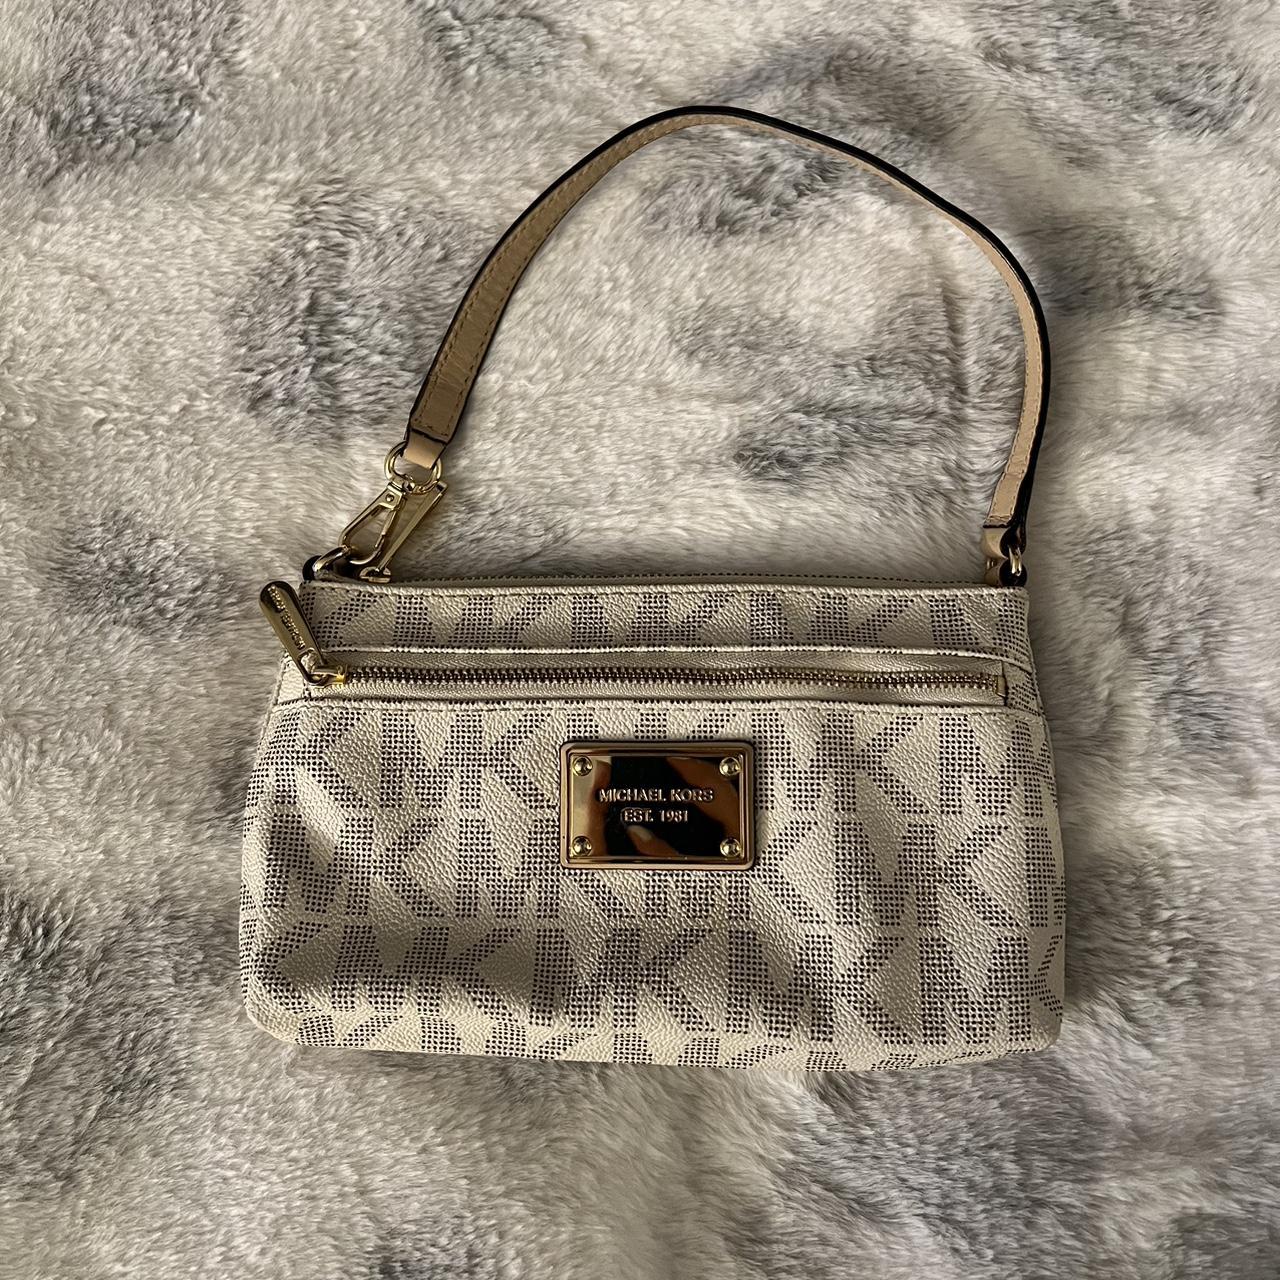 Blush Michael KORS Cindy Small Purse - Brand New with Tags